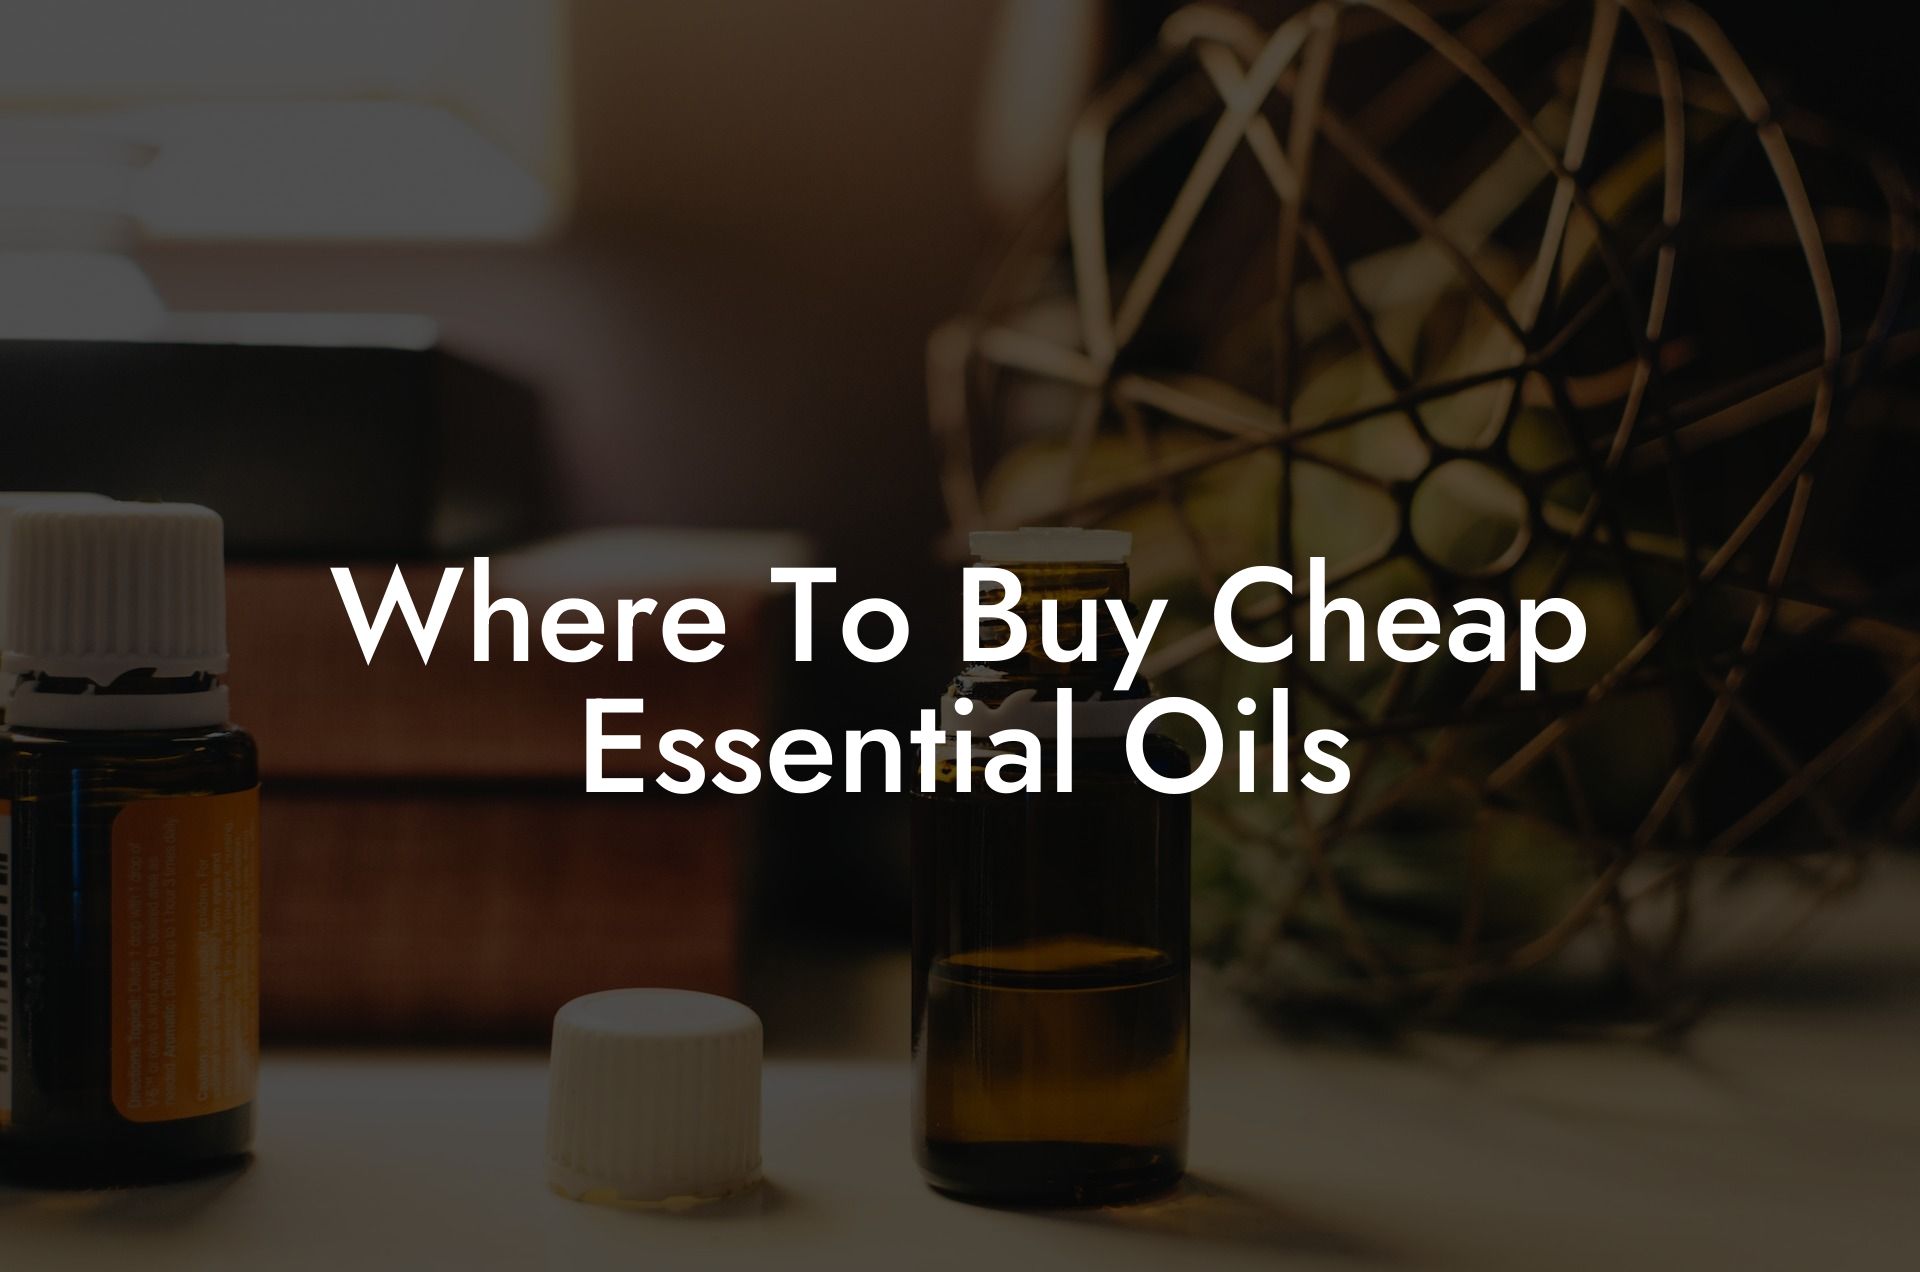 Where To Buy Cheap Essential Oils